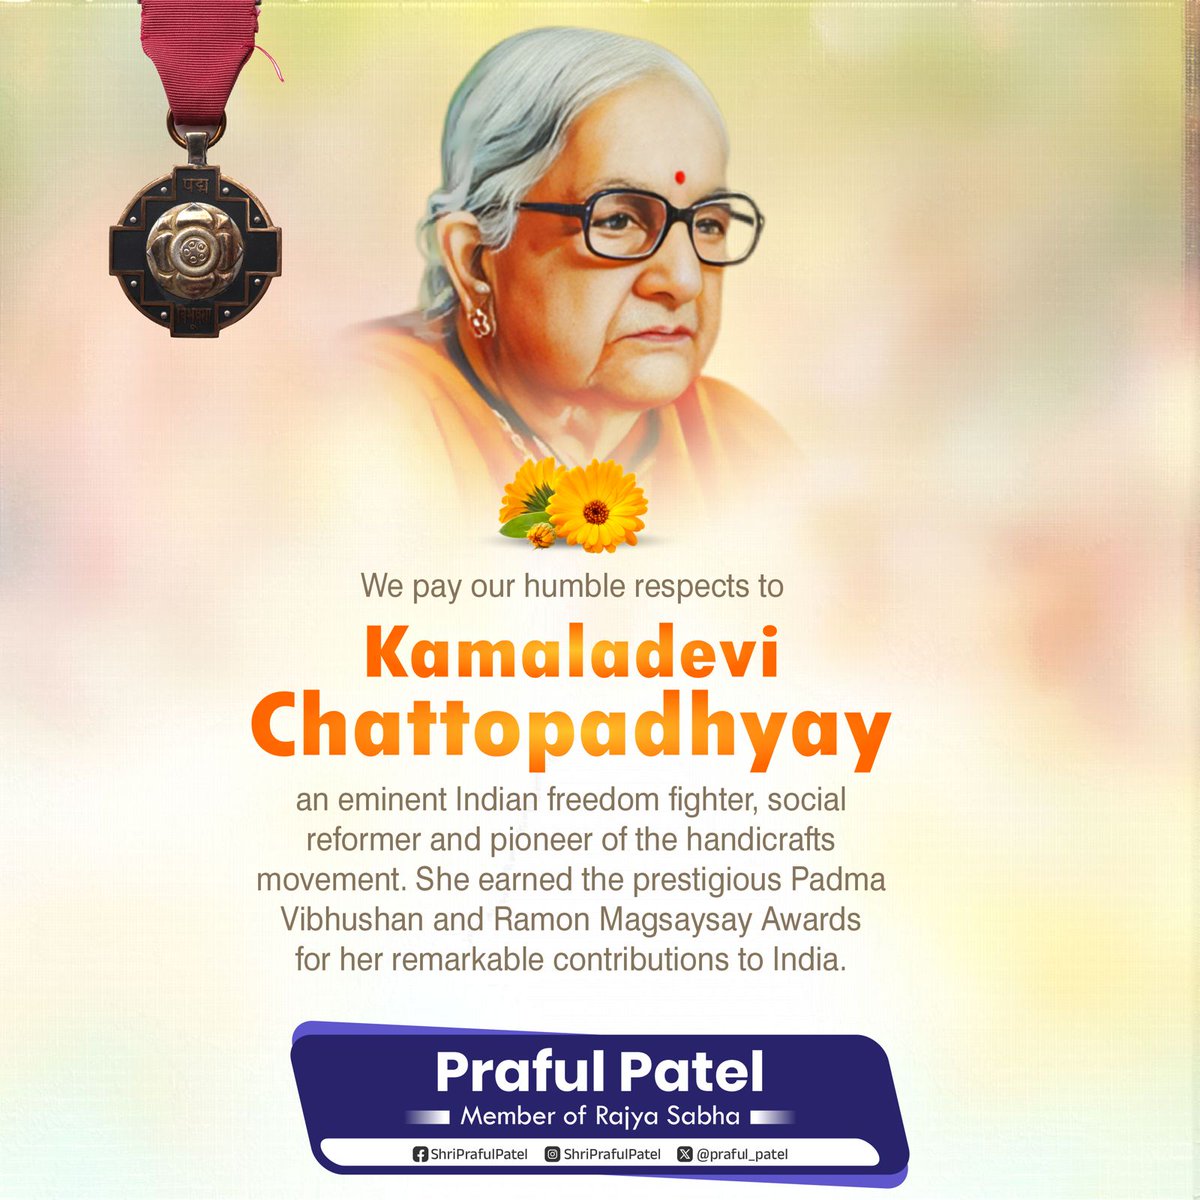 Remembering Kamaladevi Chattopadhyay, a distinguished Indian freedom fighter, social reformer, and a trailblazer in the handicrafts movement. Her contributions earned her the prestigious Padma Vibhushan and Ramon Magsaysay Awards.

#KamaladeviChattopadhyay